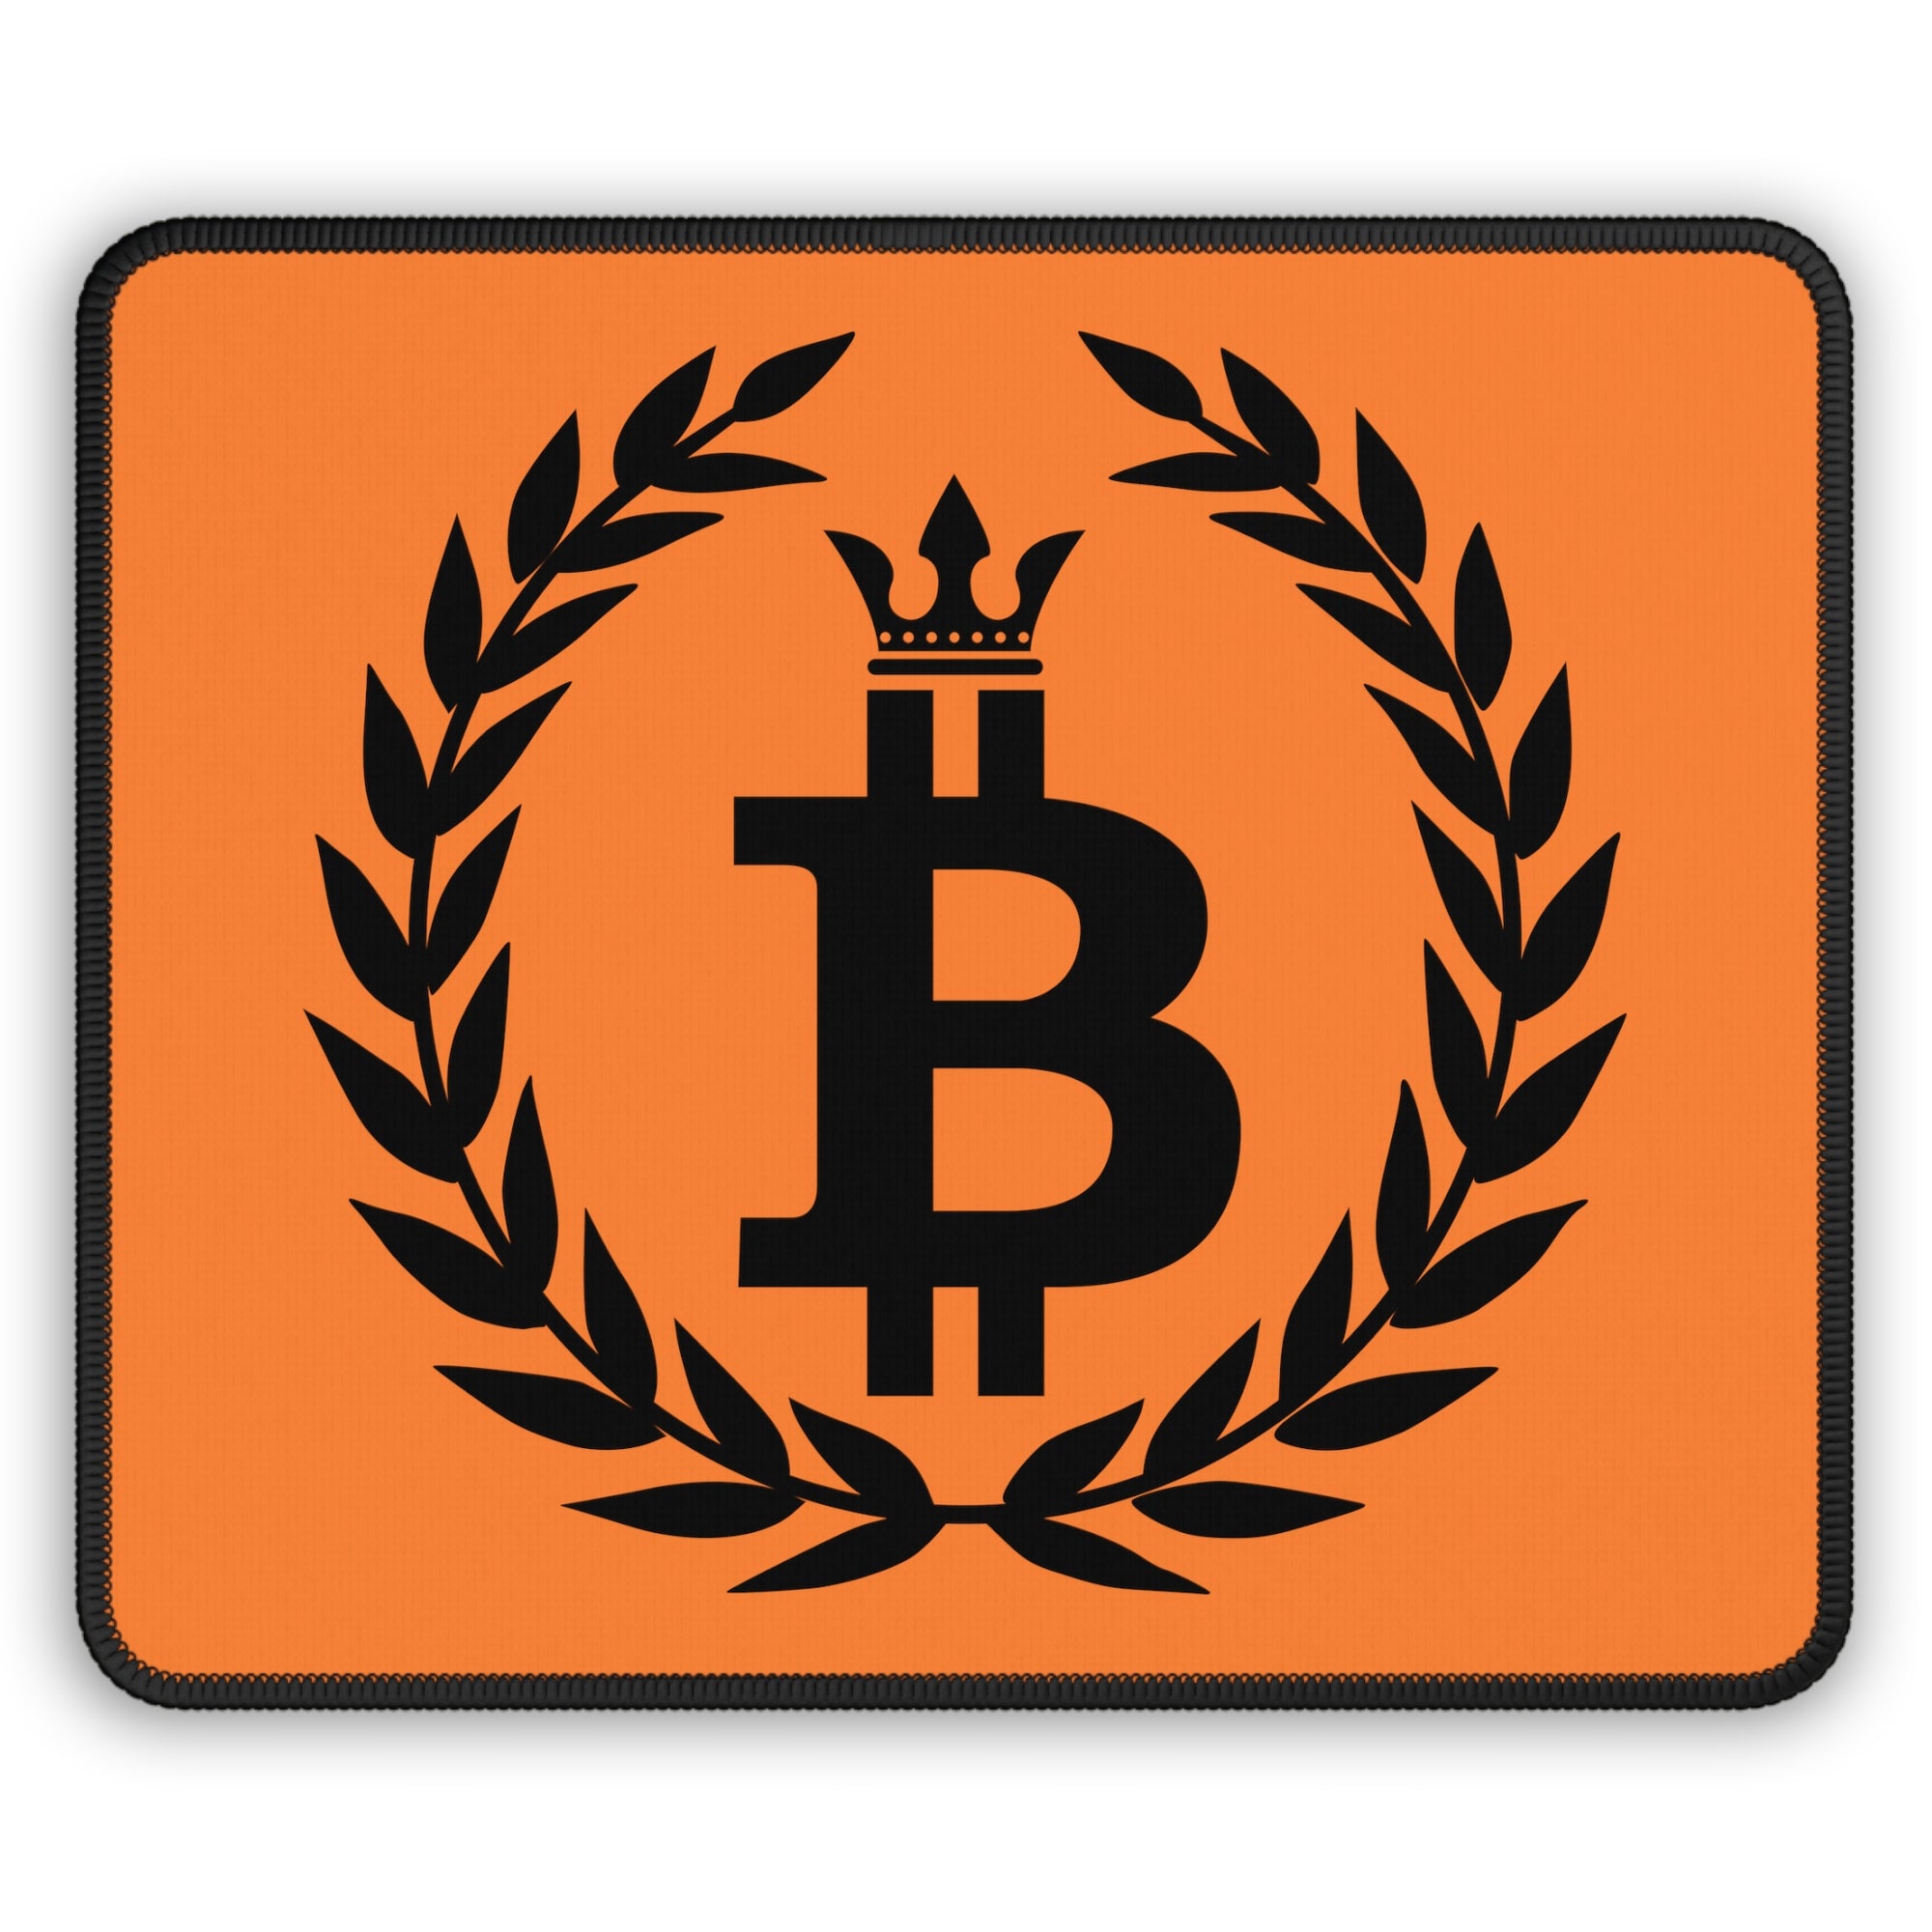 Bitcoin Merchandise - Bitcoin Dominance Mouse Pad Close Up View.